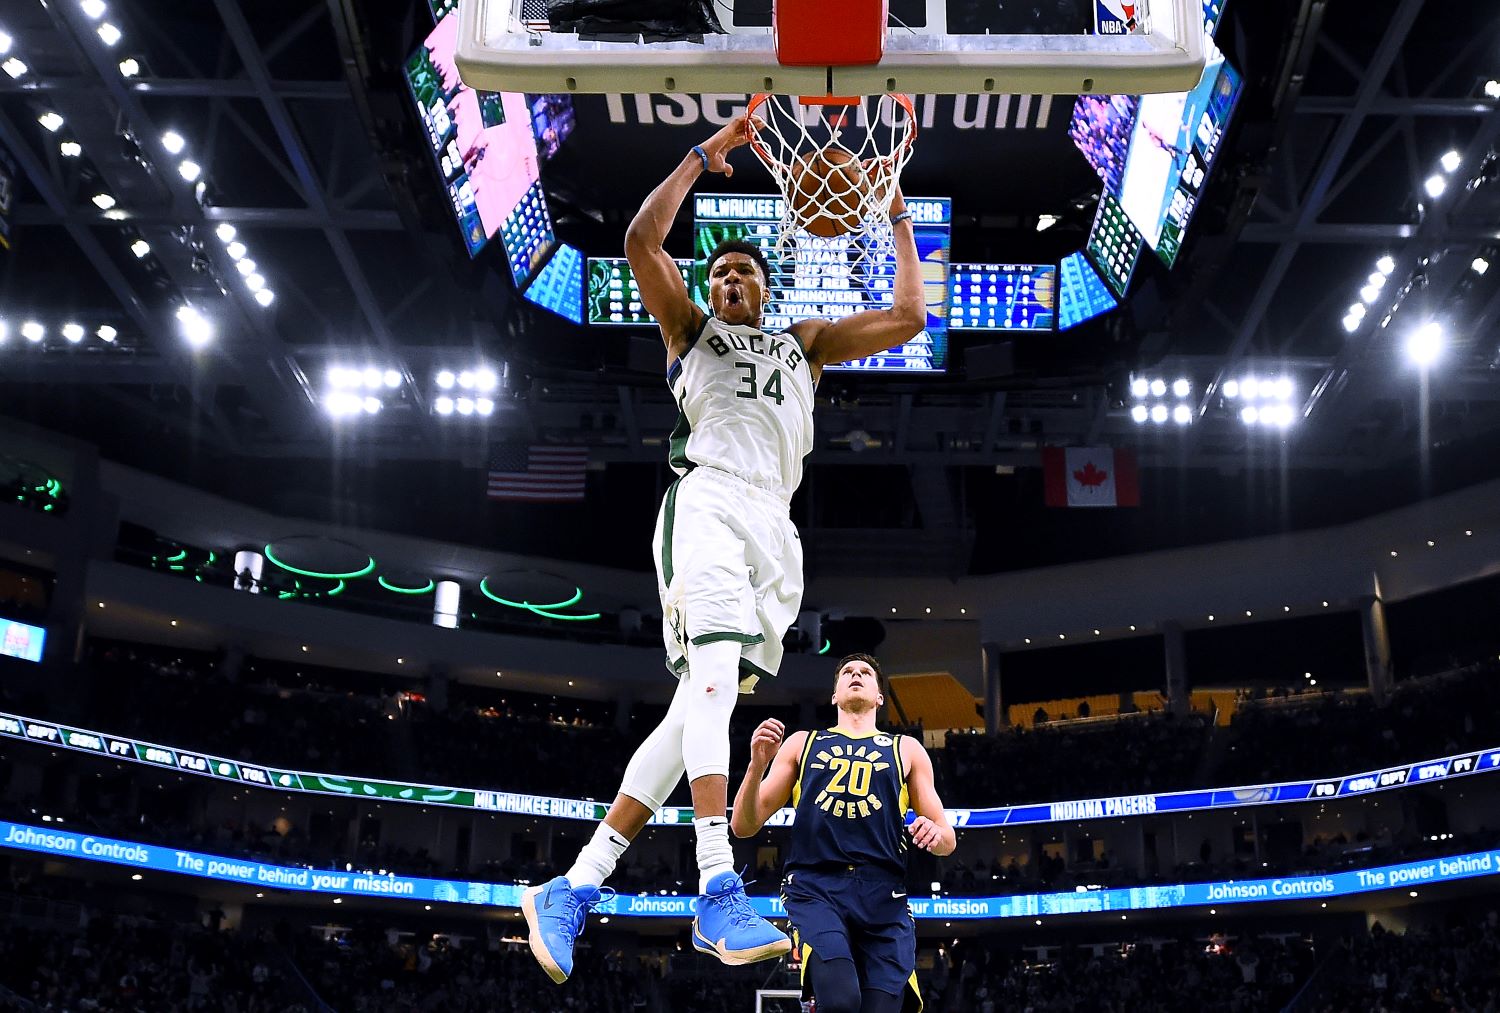 By trading for Bogdan Bogdanovic, the Milwaukee Bucks just added a potentially elite scoring threat to pair with Giannis Antetokounmpo.